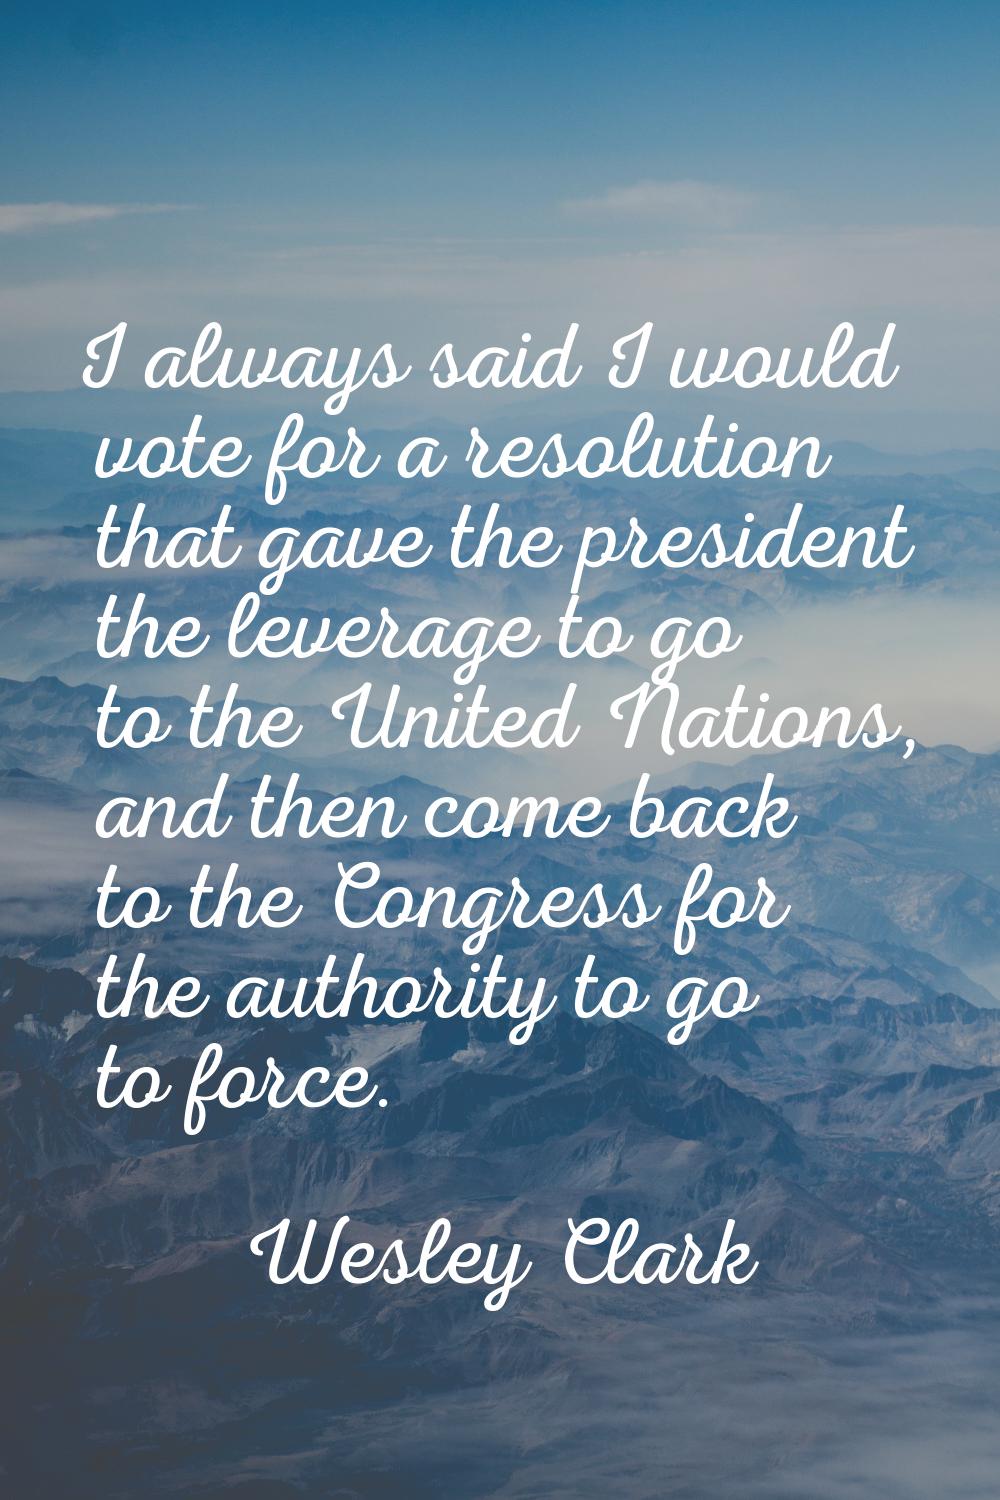 I always said I would vote for a resolution that gave the president the leverage to go to the Unite